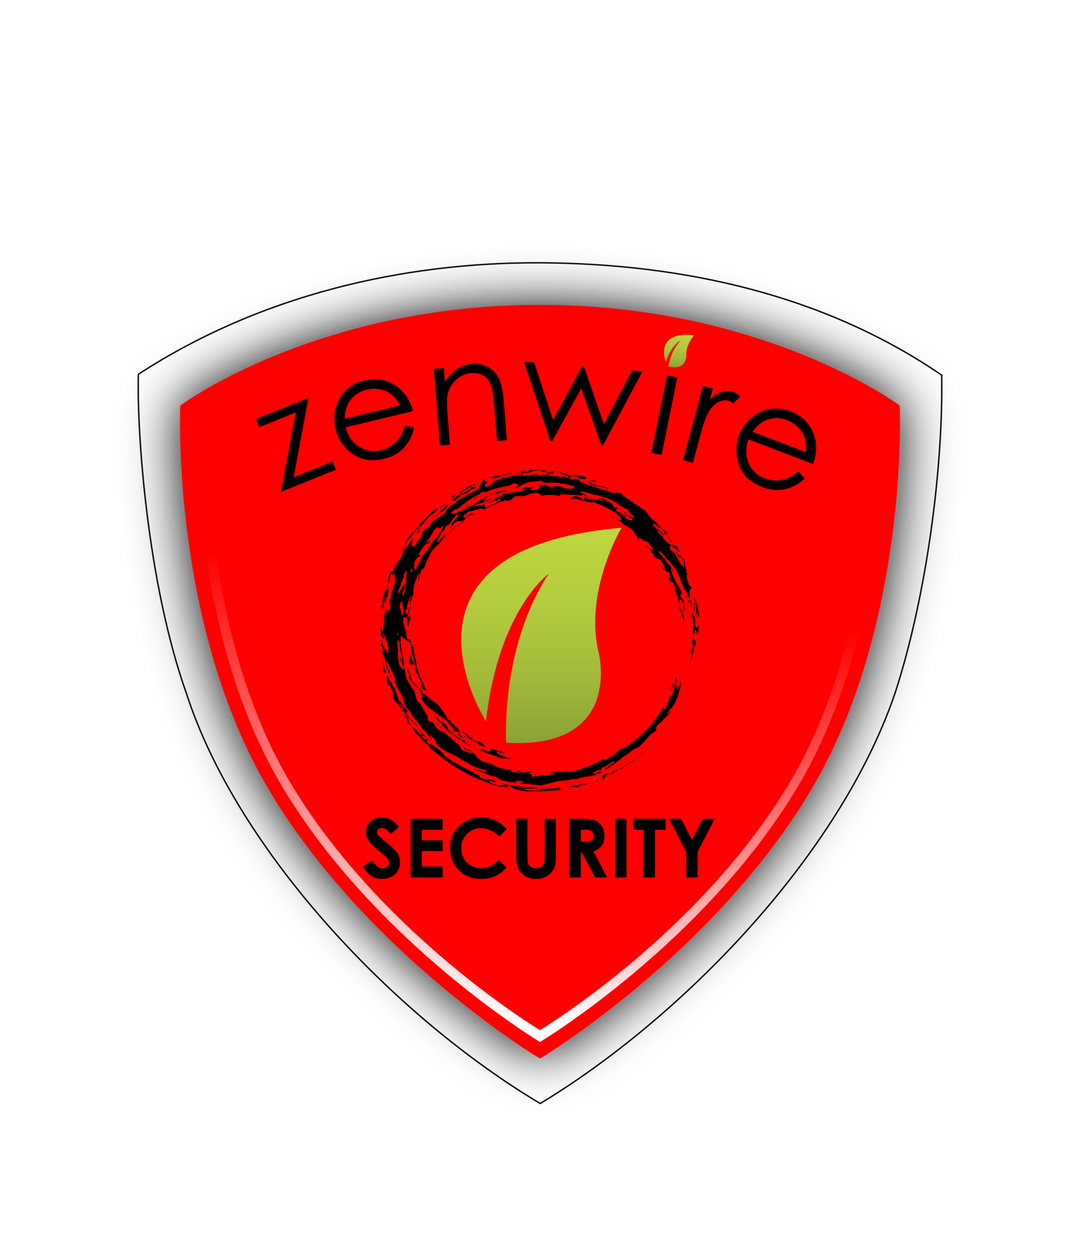 Zenwire Commercial Alarm.com Monitoring